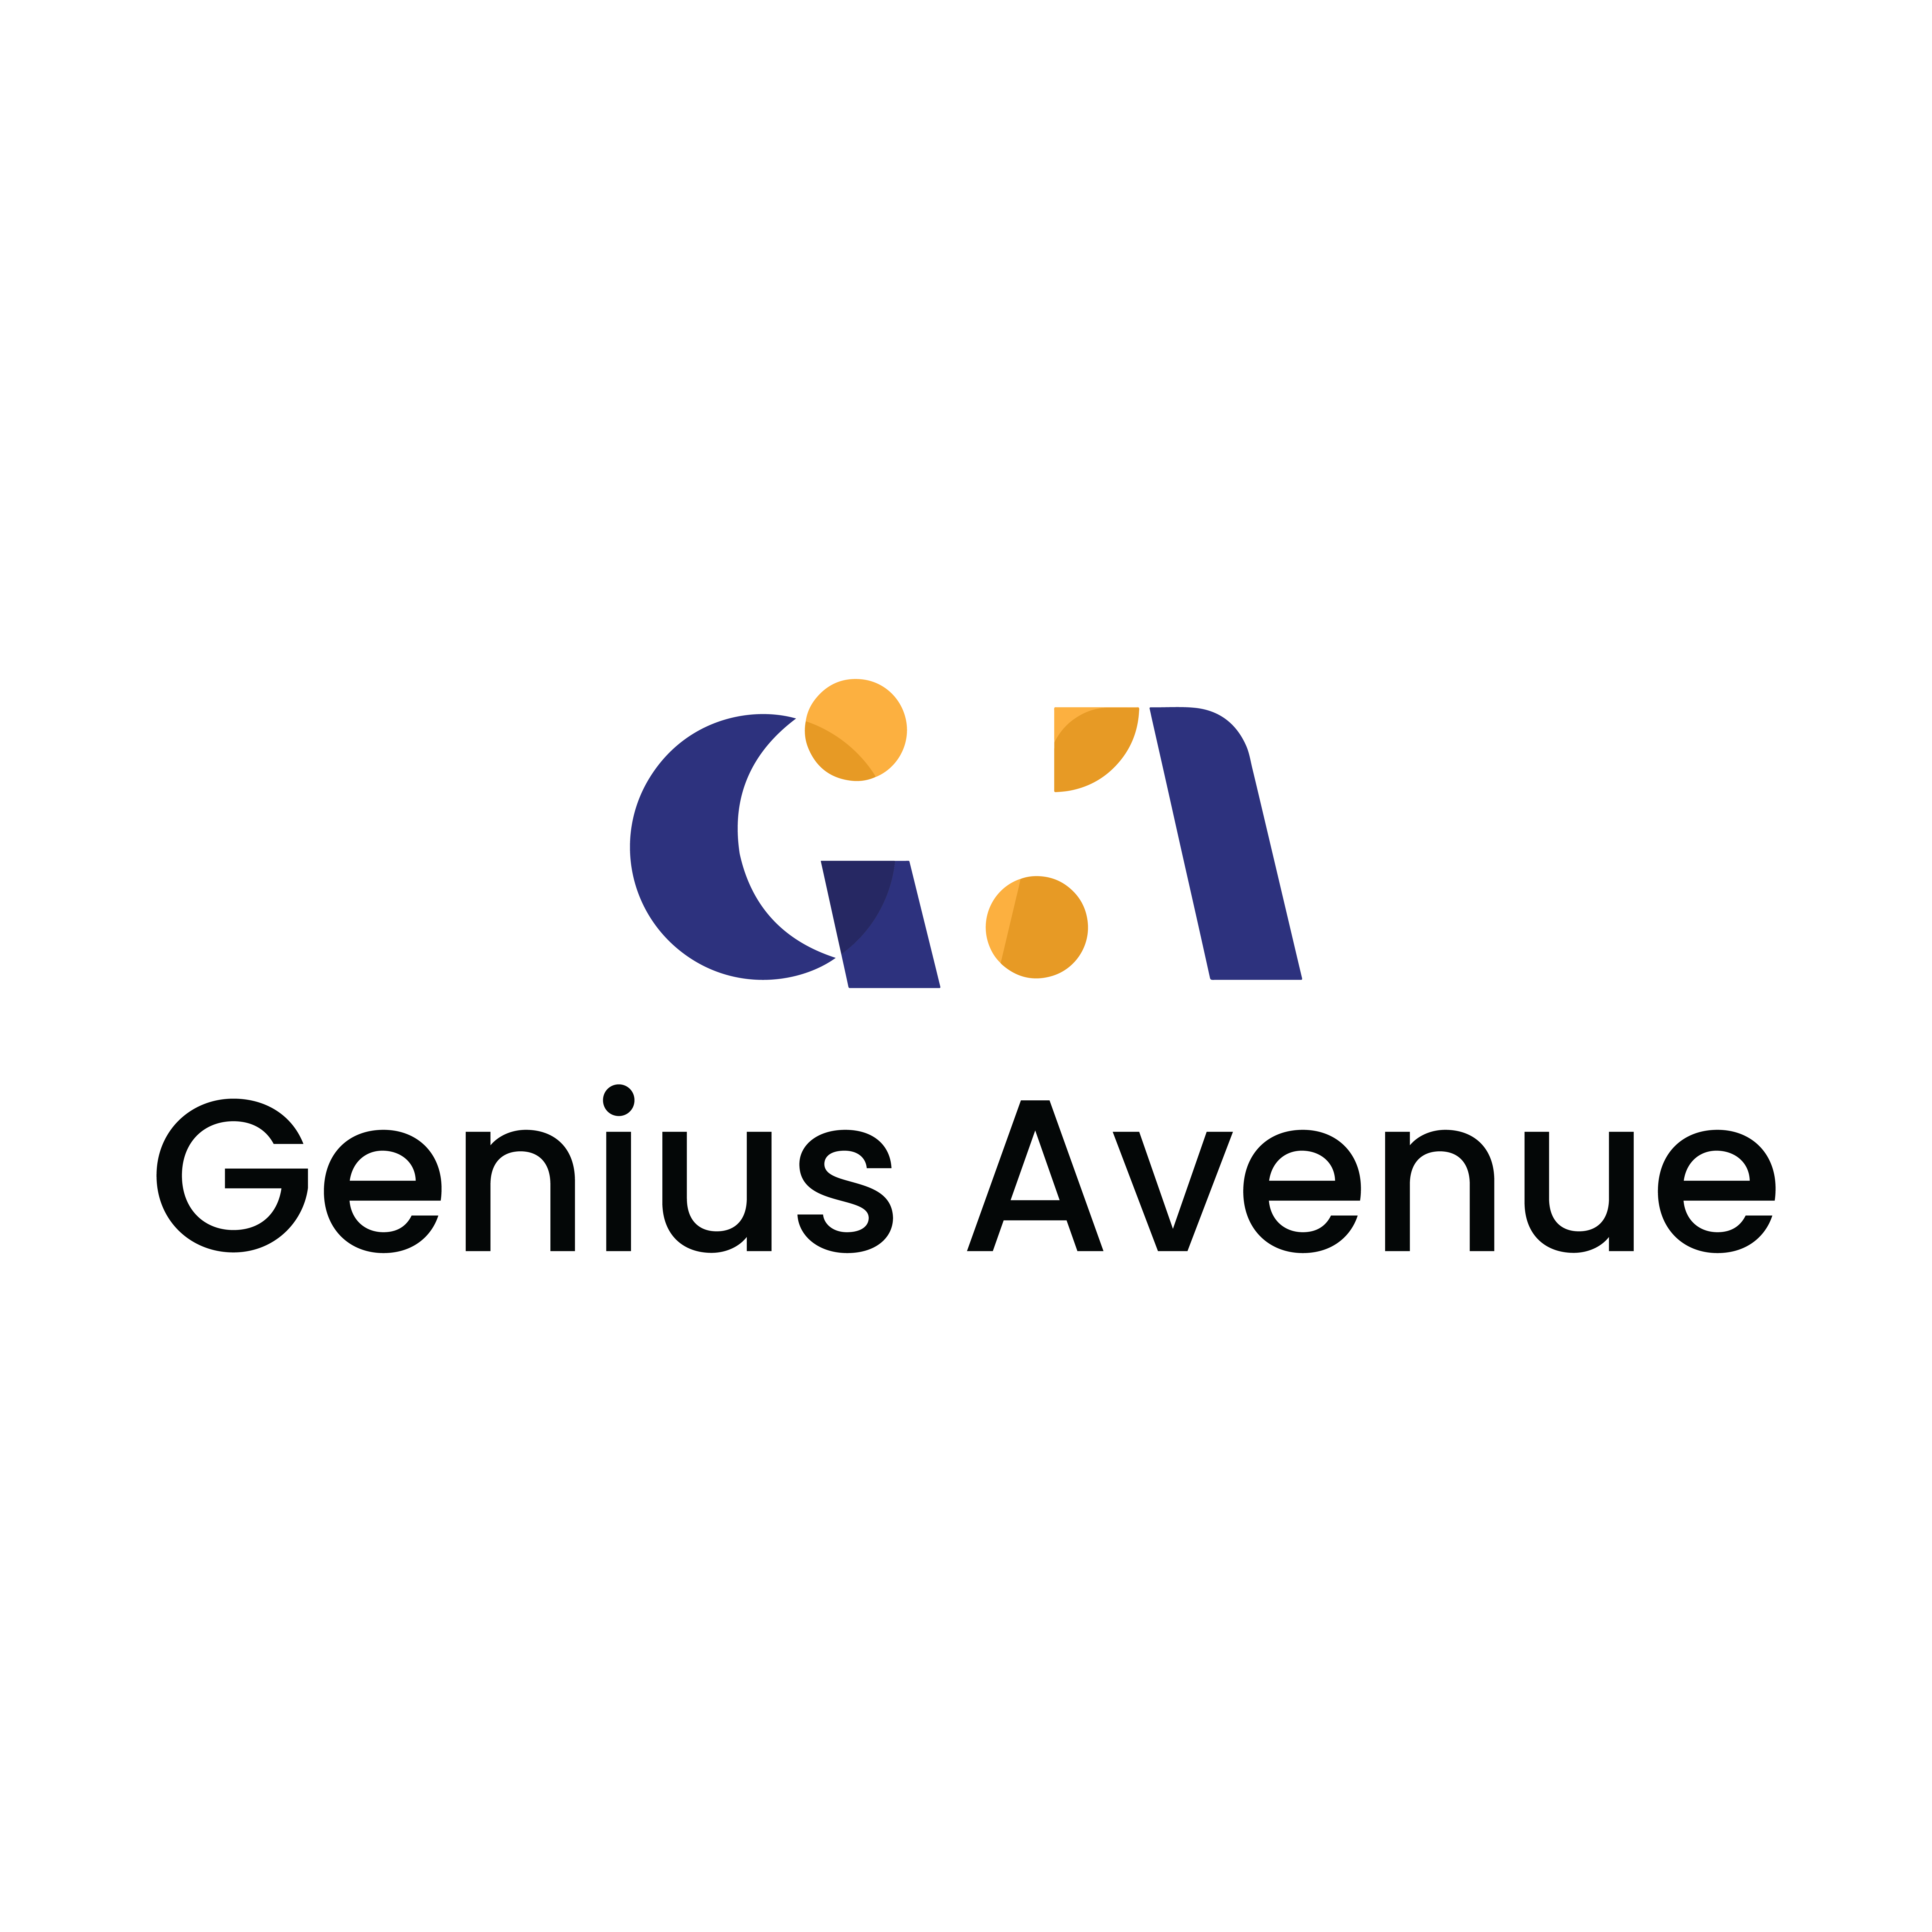 Genius Avenue Launches Innovative Financial Services